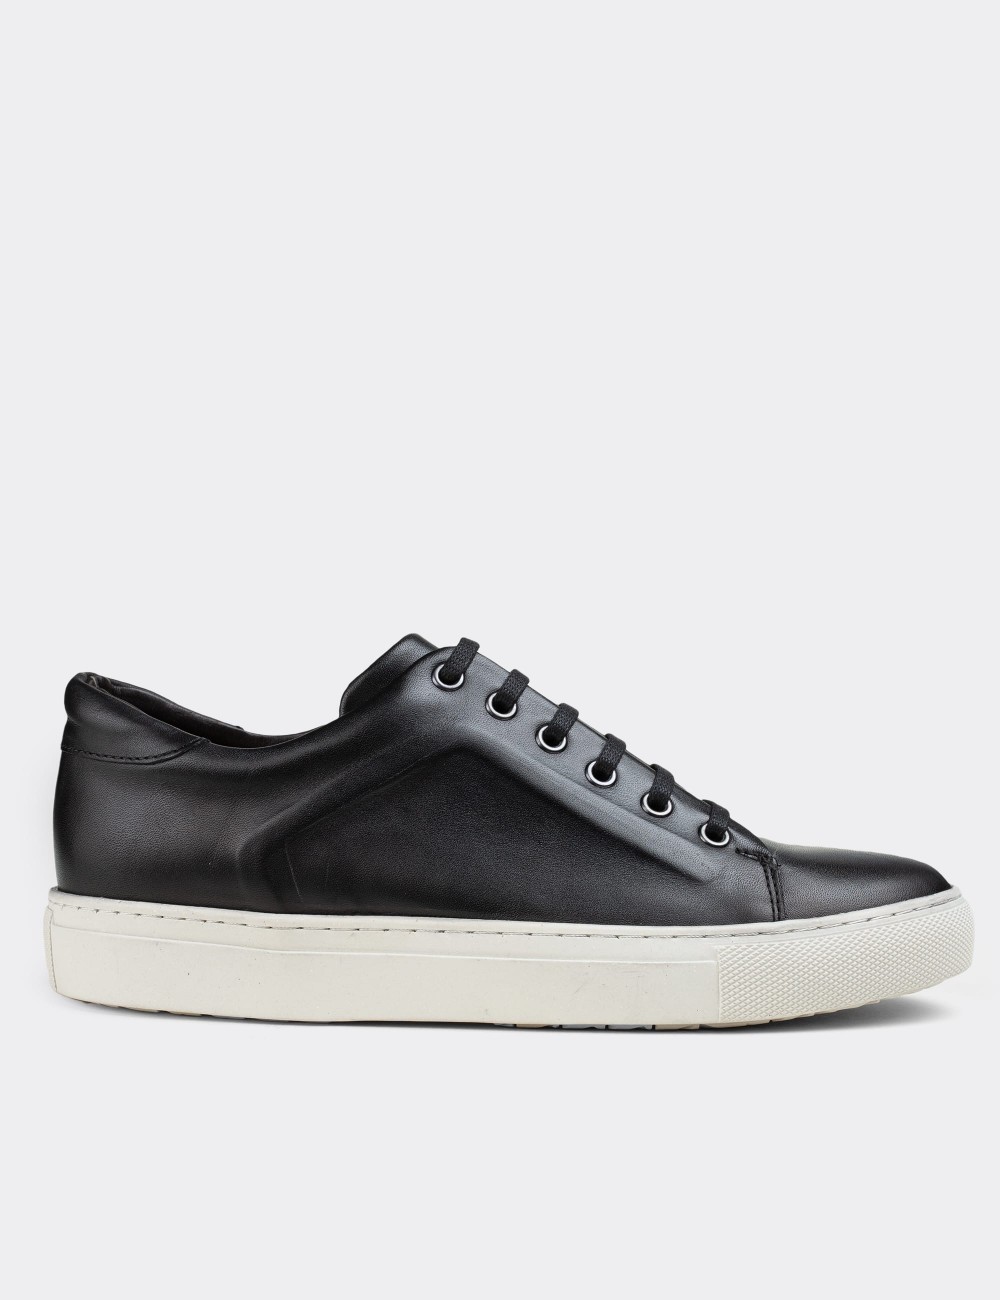 Black  Leather Sneakers - 01833MSYHC01